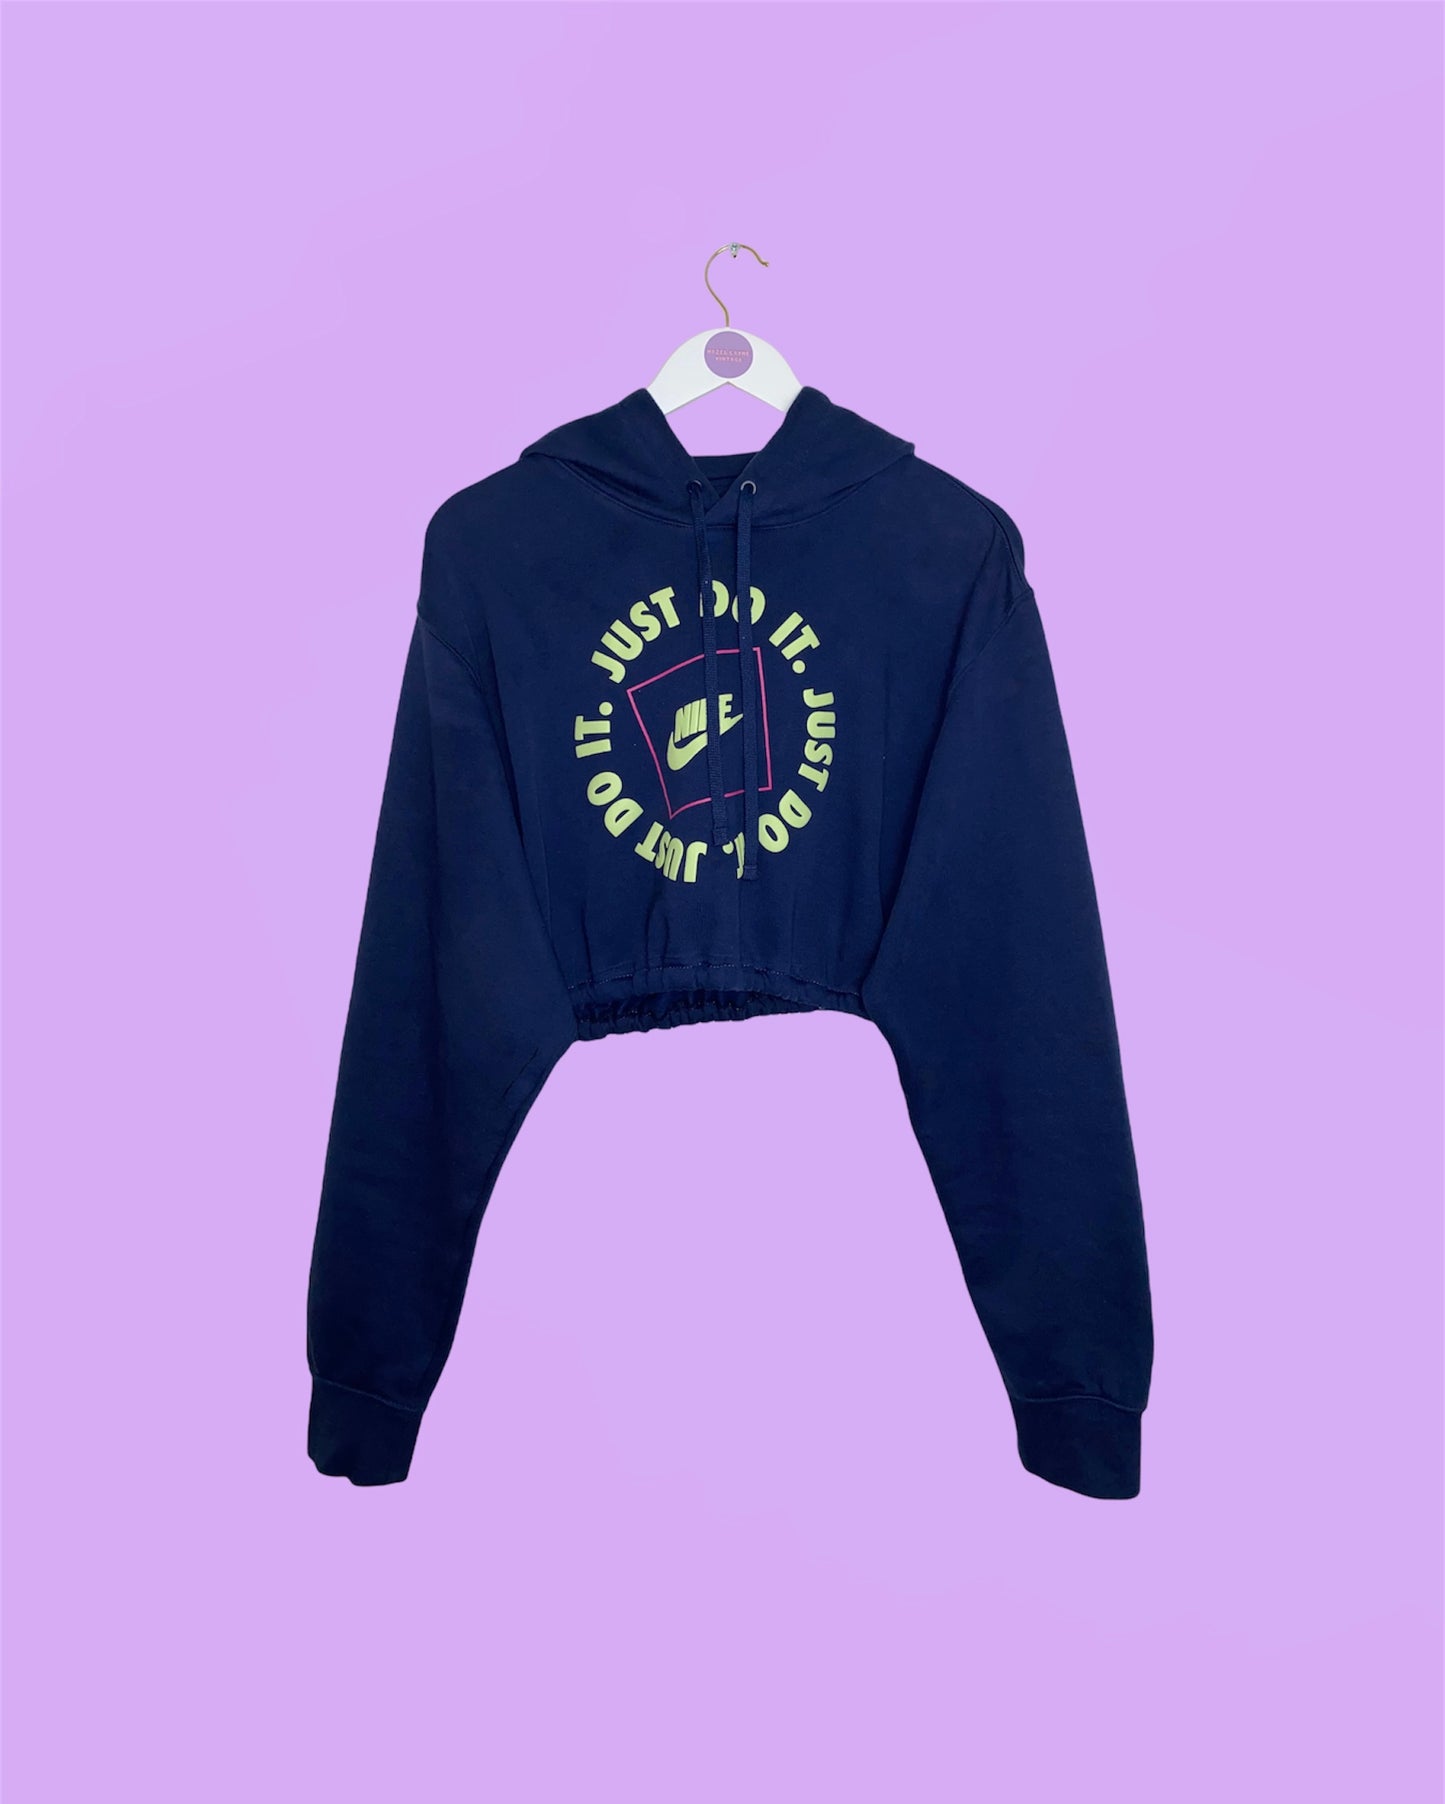 navy cropped hoodie with yellow print nike text shown on a white clothes hanger on a lilac background